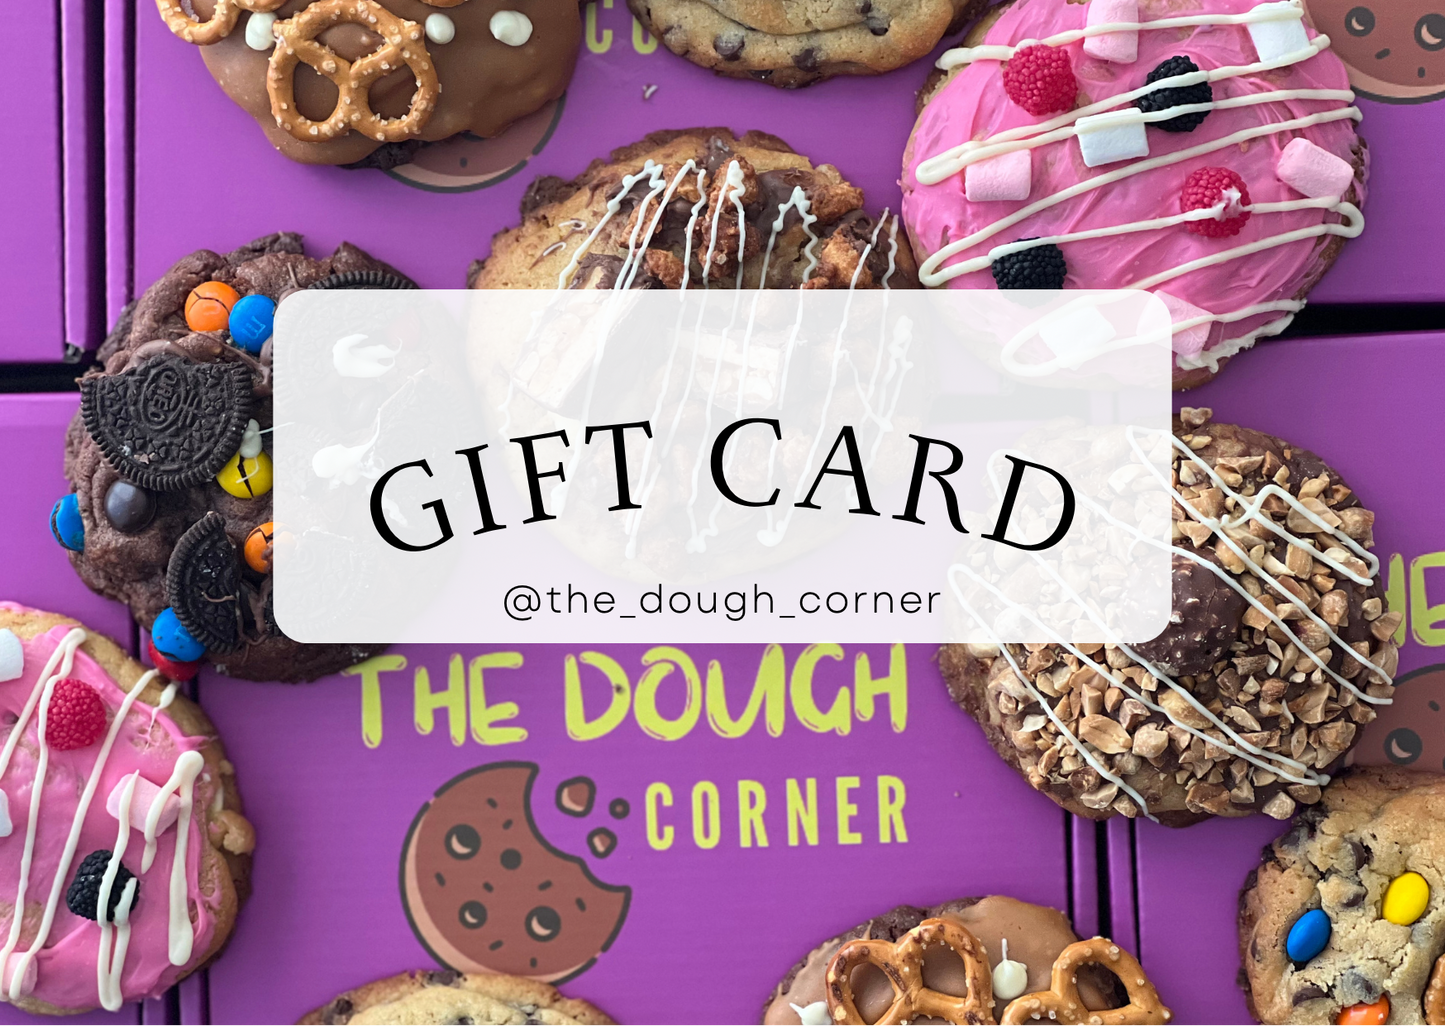 The Dough Bliss Gift Card: The ultimate gift for cookie and brownie lovers from The Dough Corner.